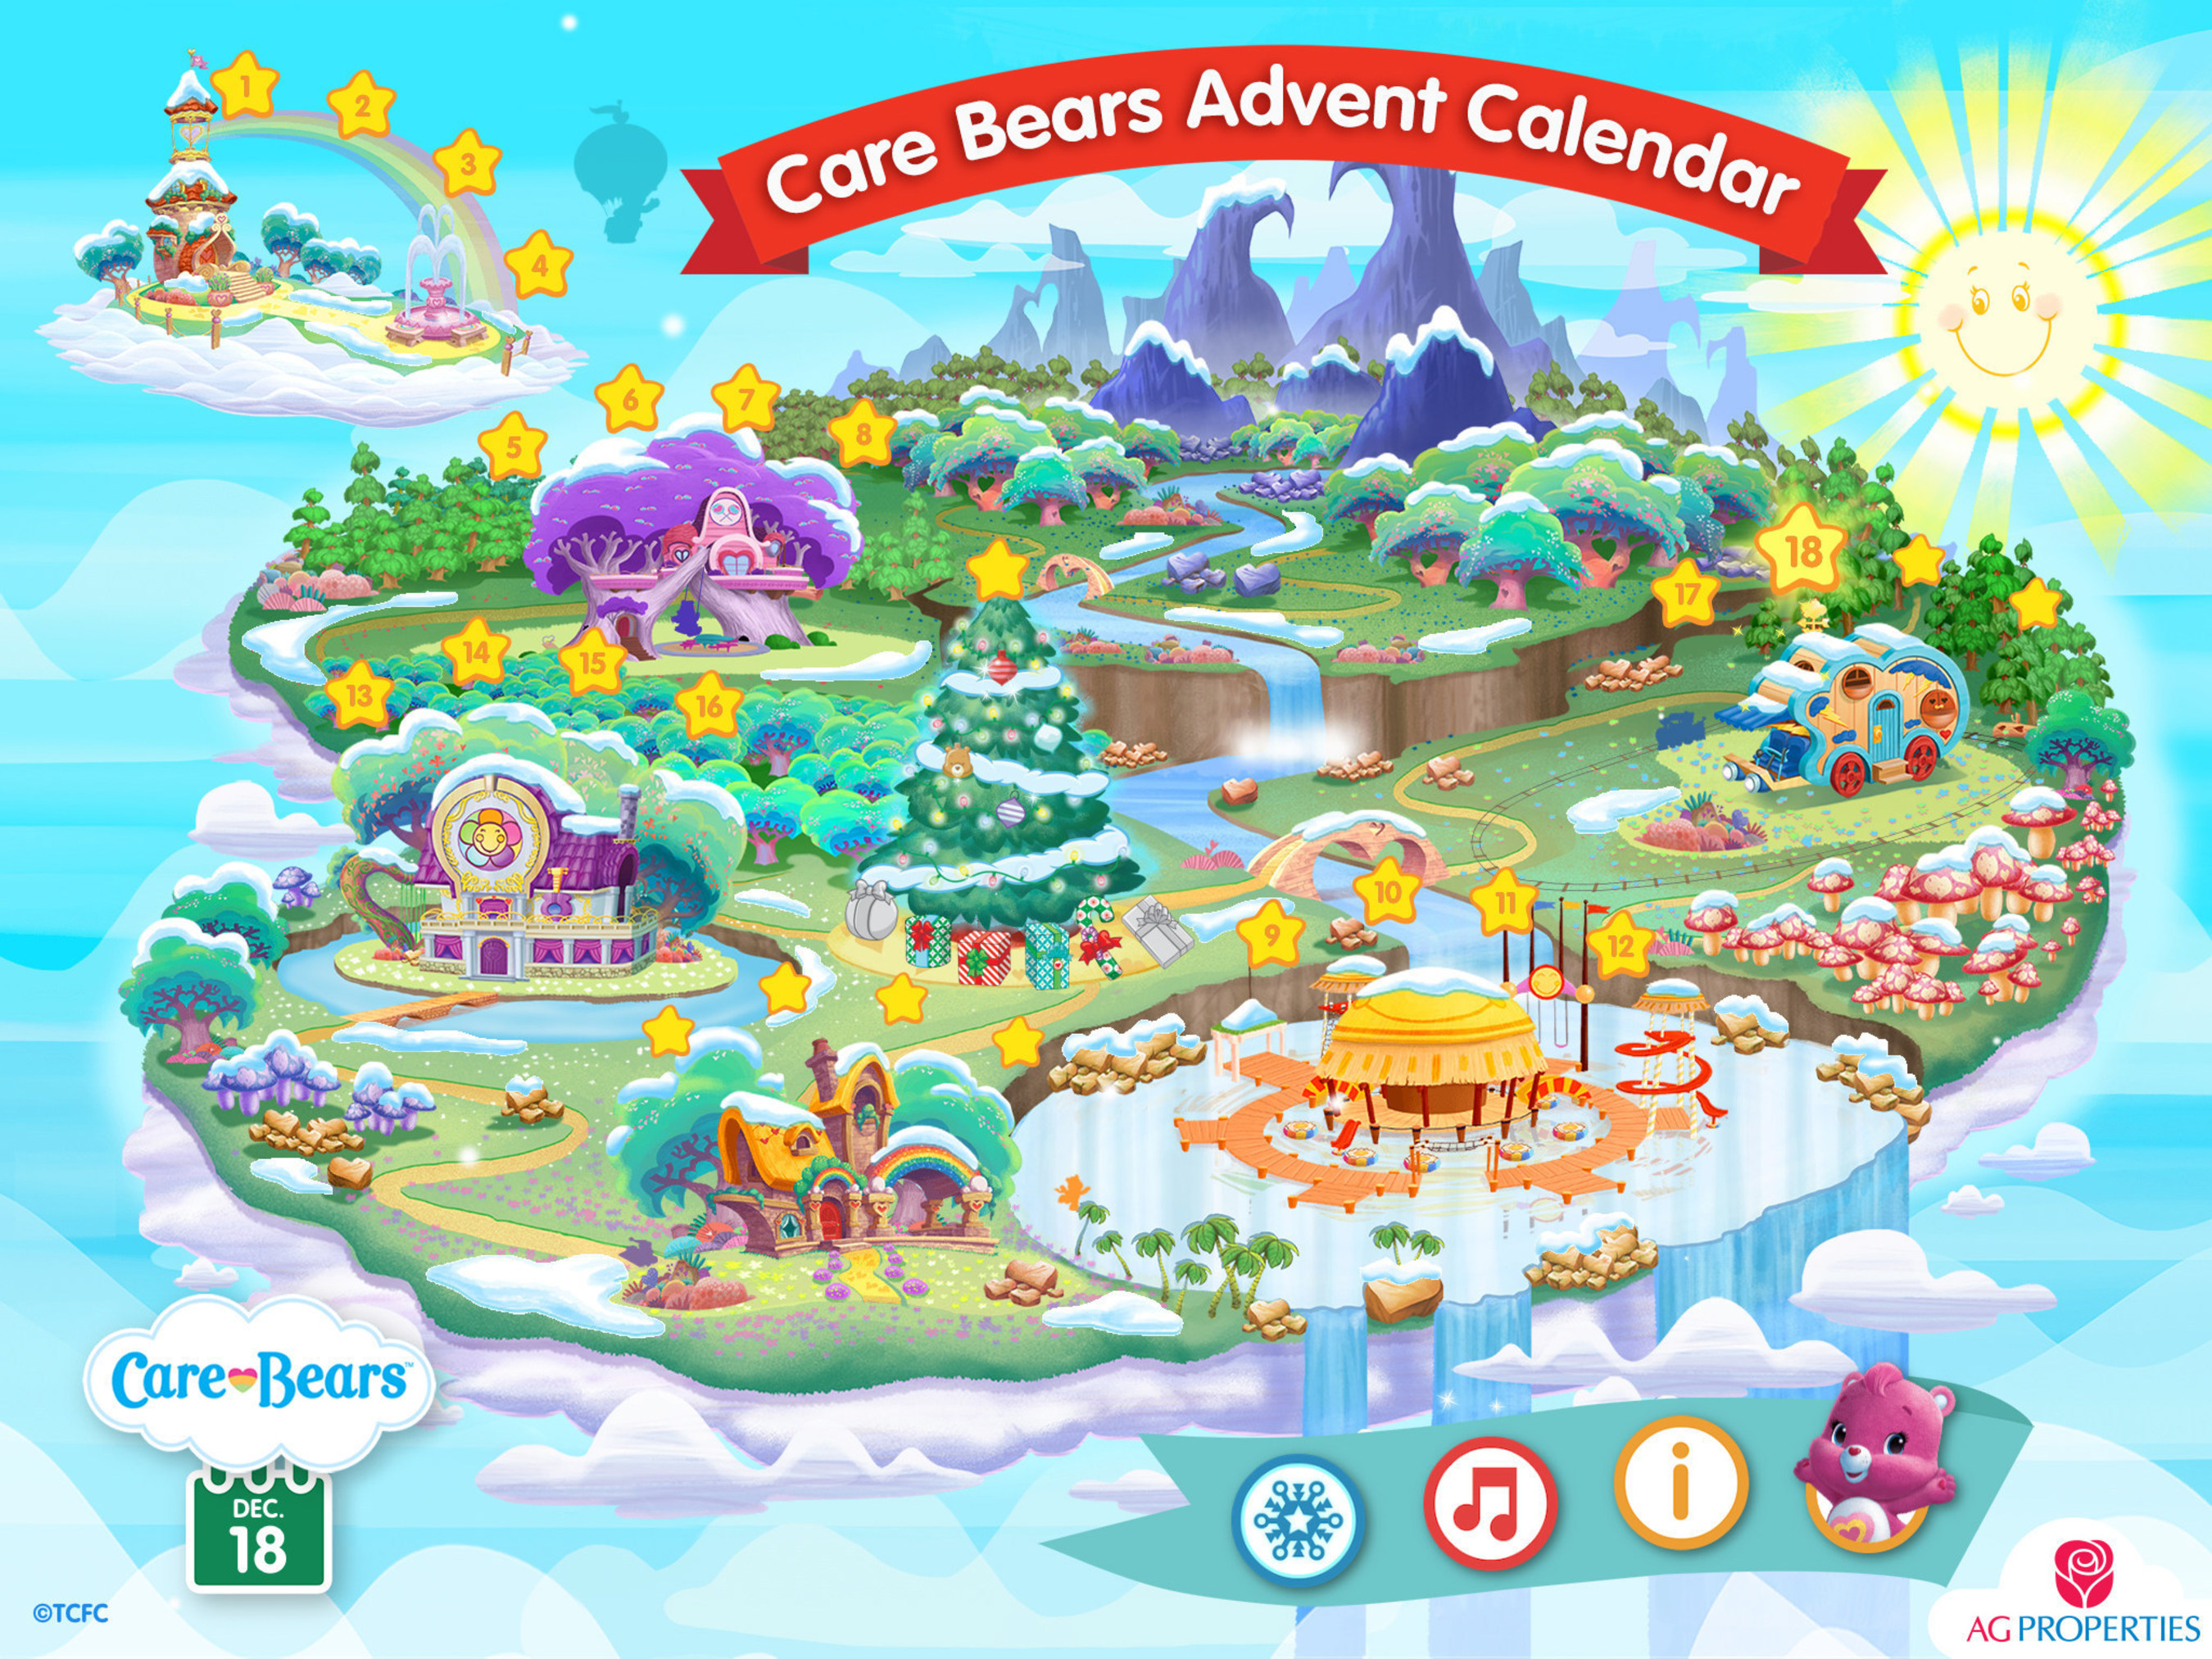 Count Down to Christmas with Brand-New Care Bears(TM) Advent Calendar! This interactive digital calendar is available for PC, Mac and iPad and brings sharing and caring to holiday anticipation.